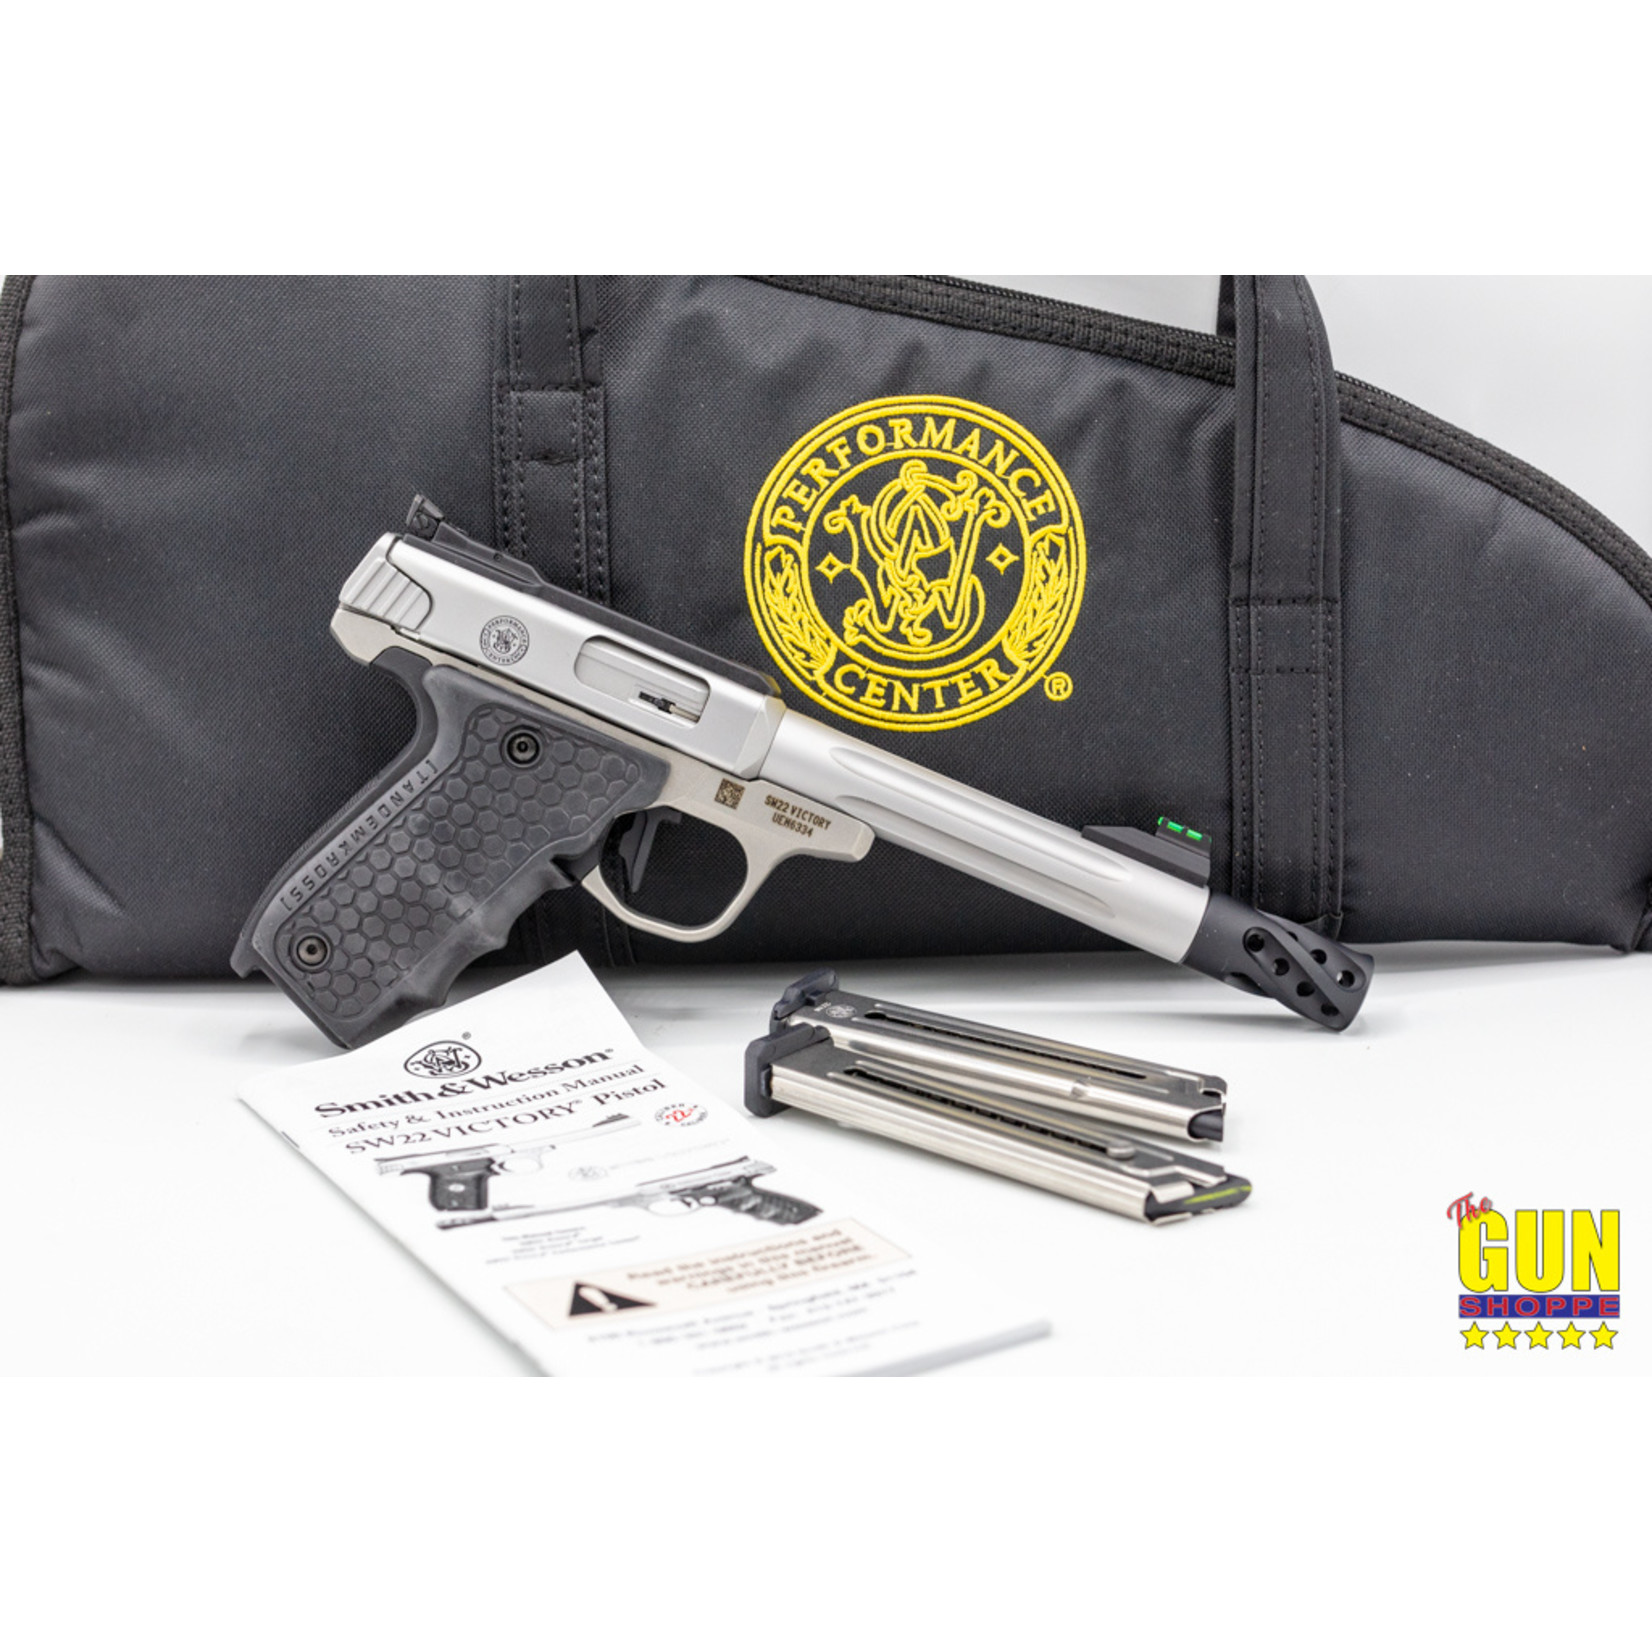 Smith & Wesson Used Smith and Wesson Victory Performance Center